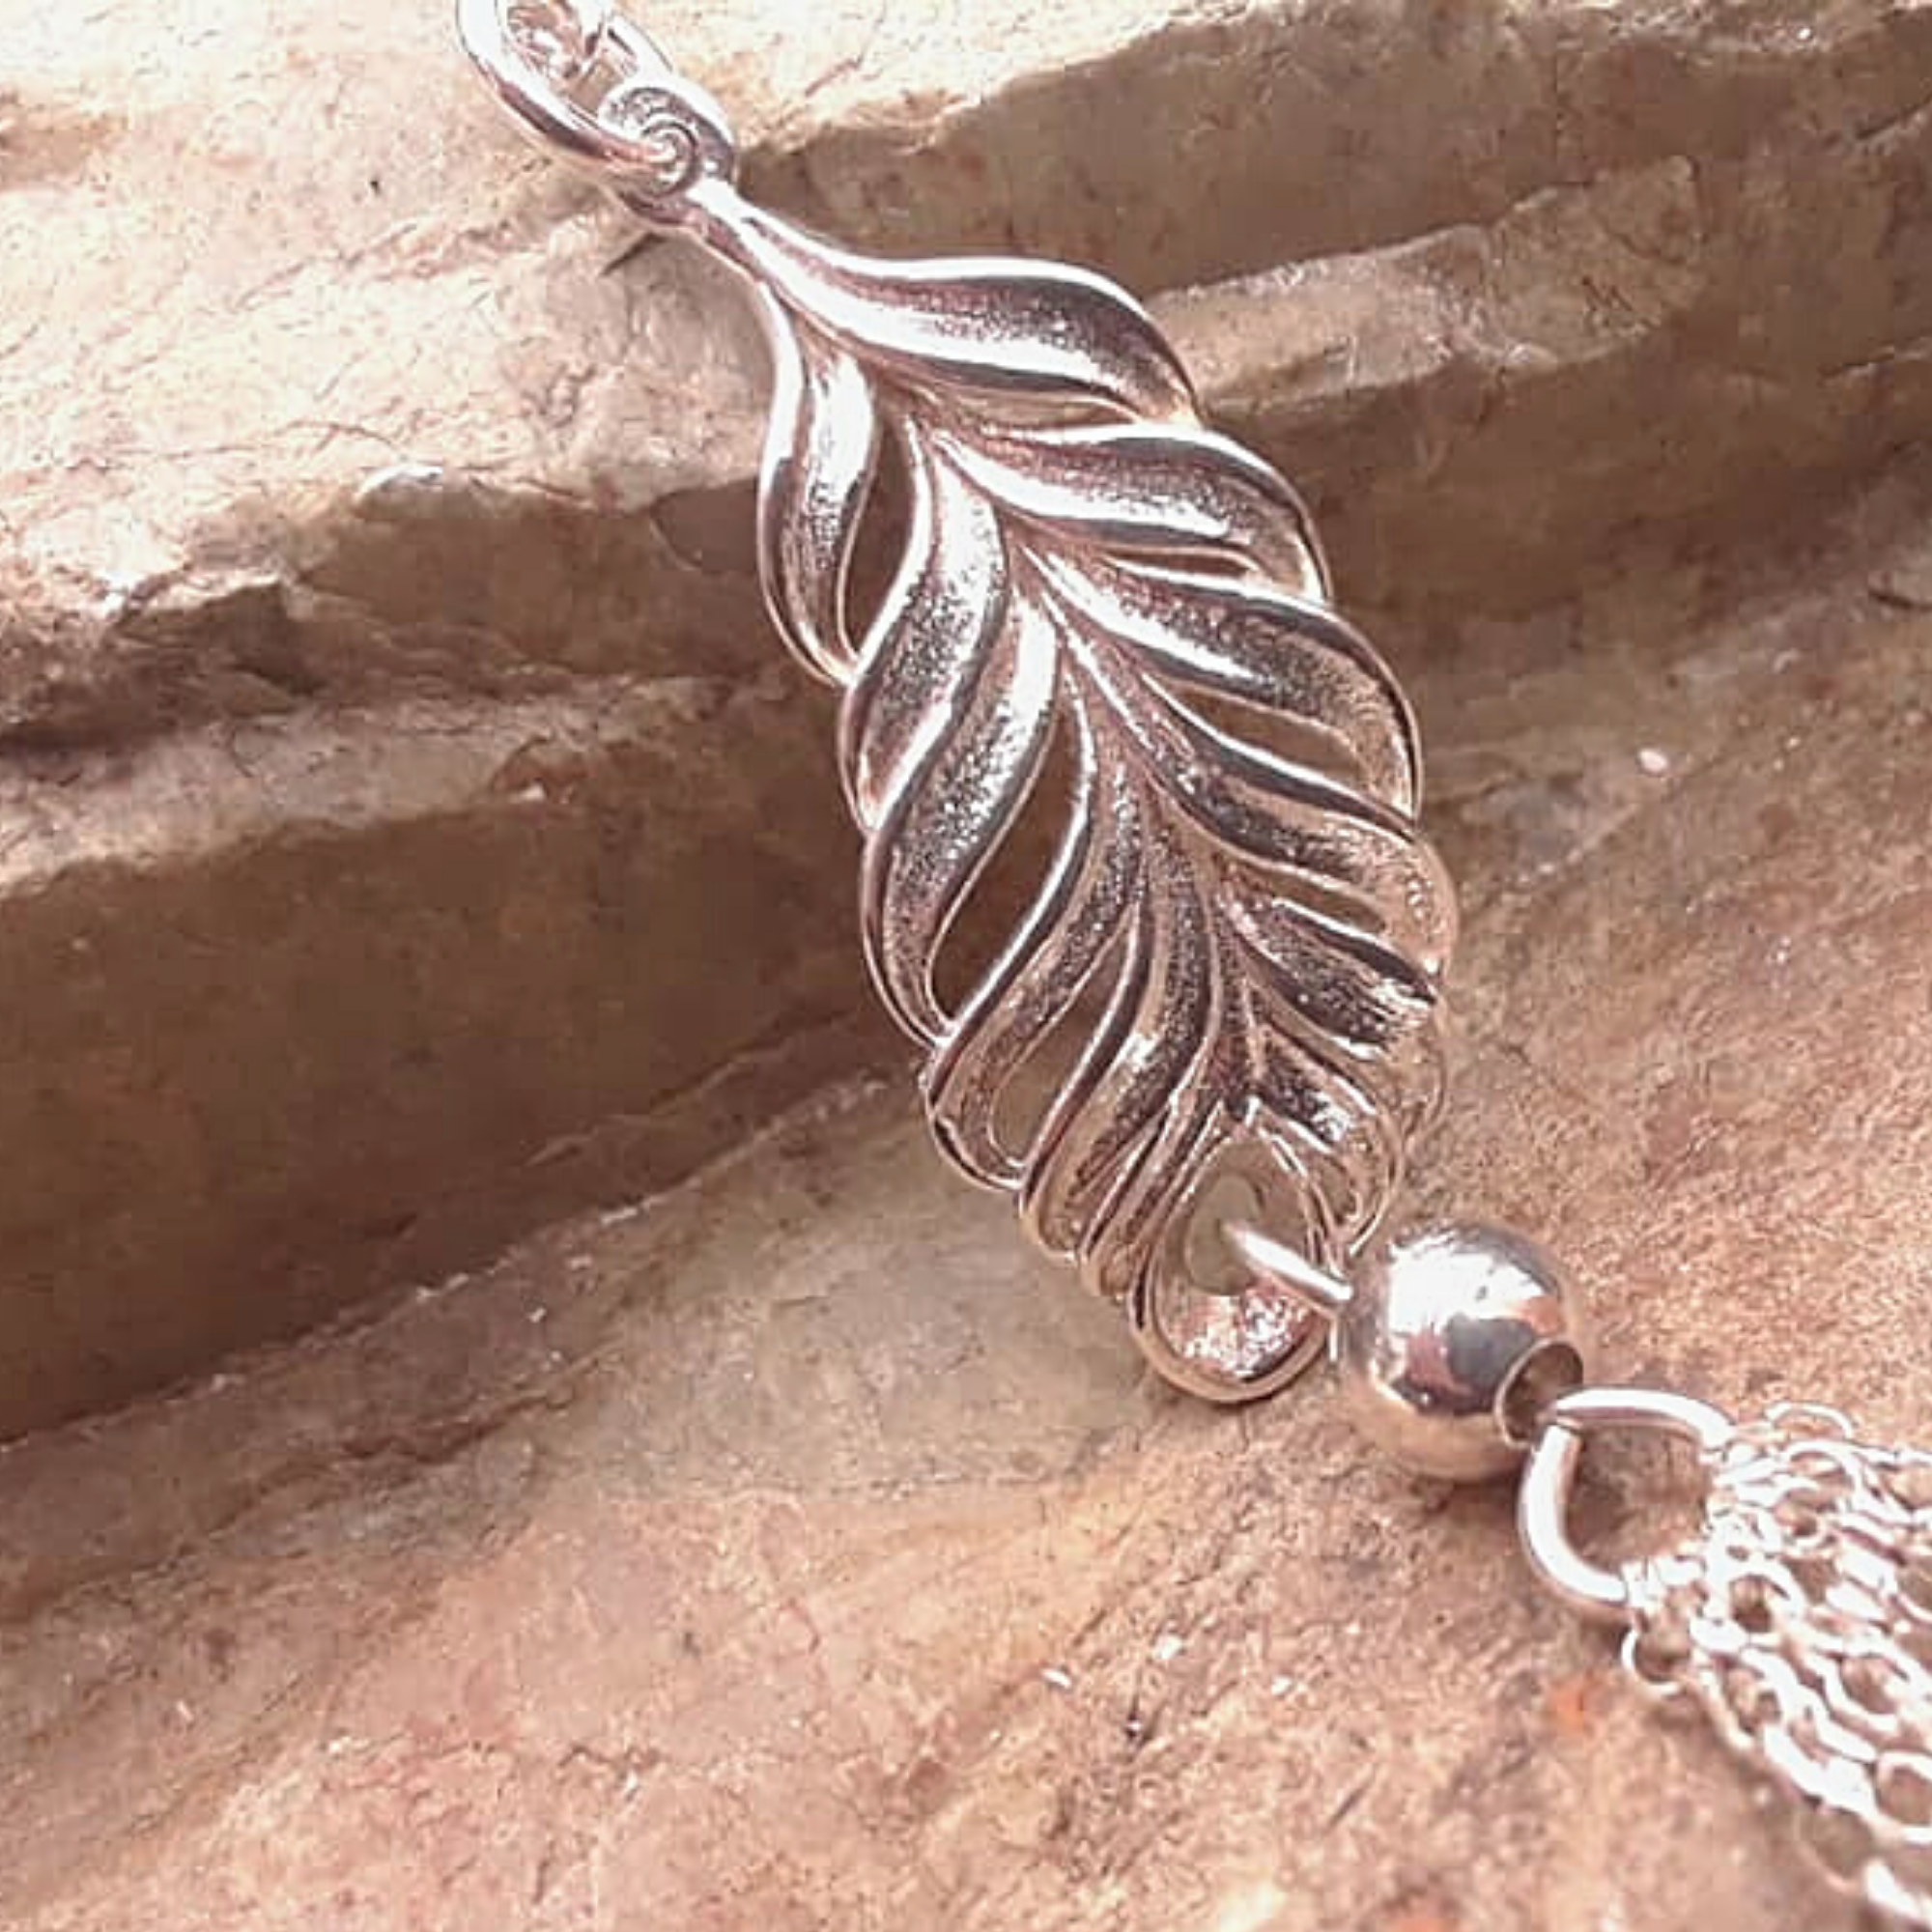 Sterling Silver Feather Tassel Necklace